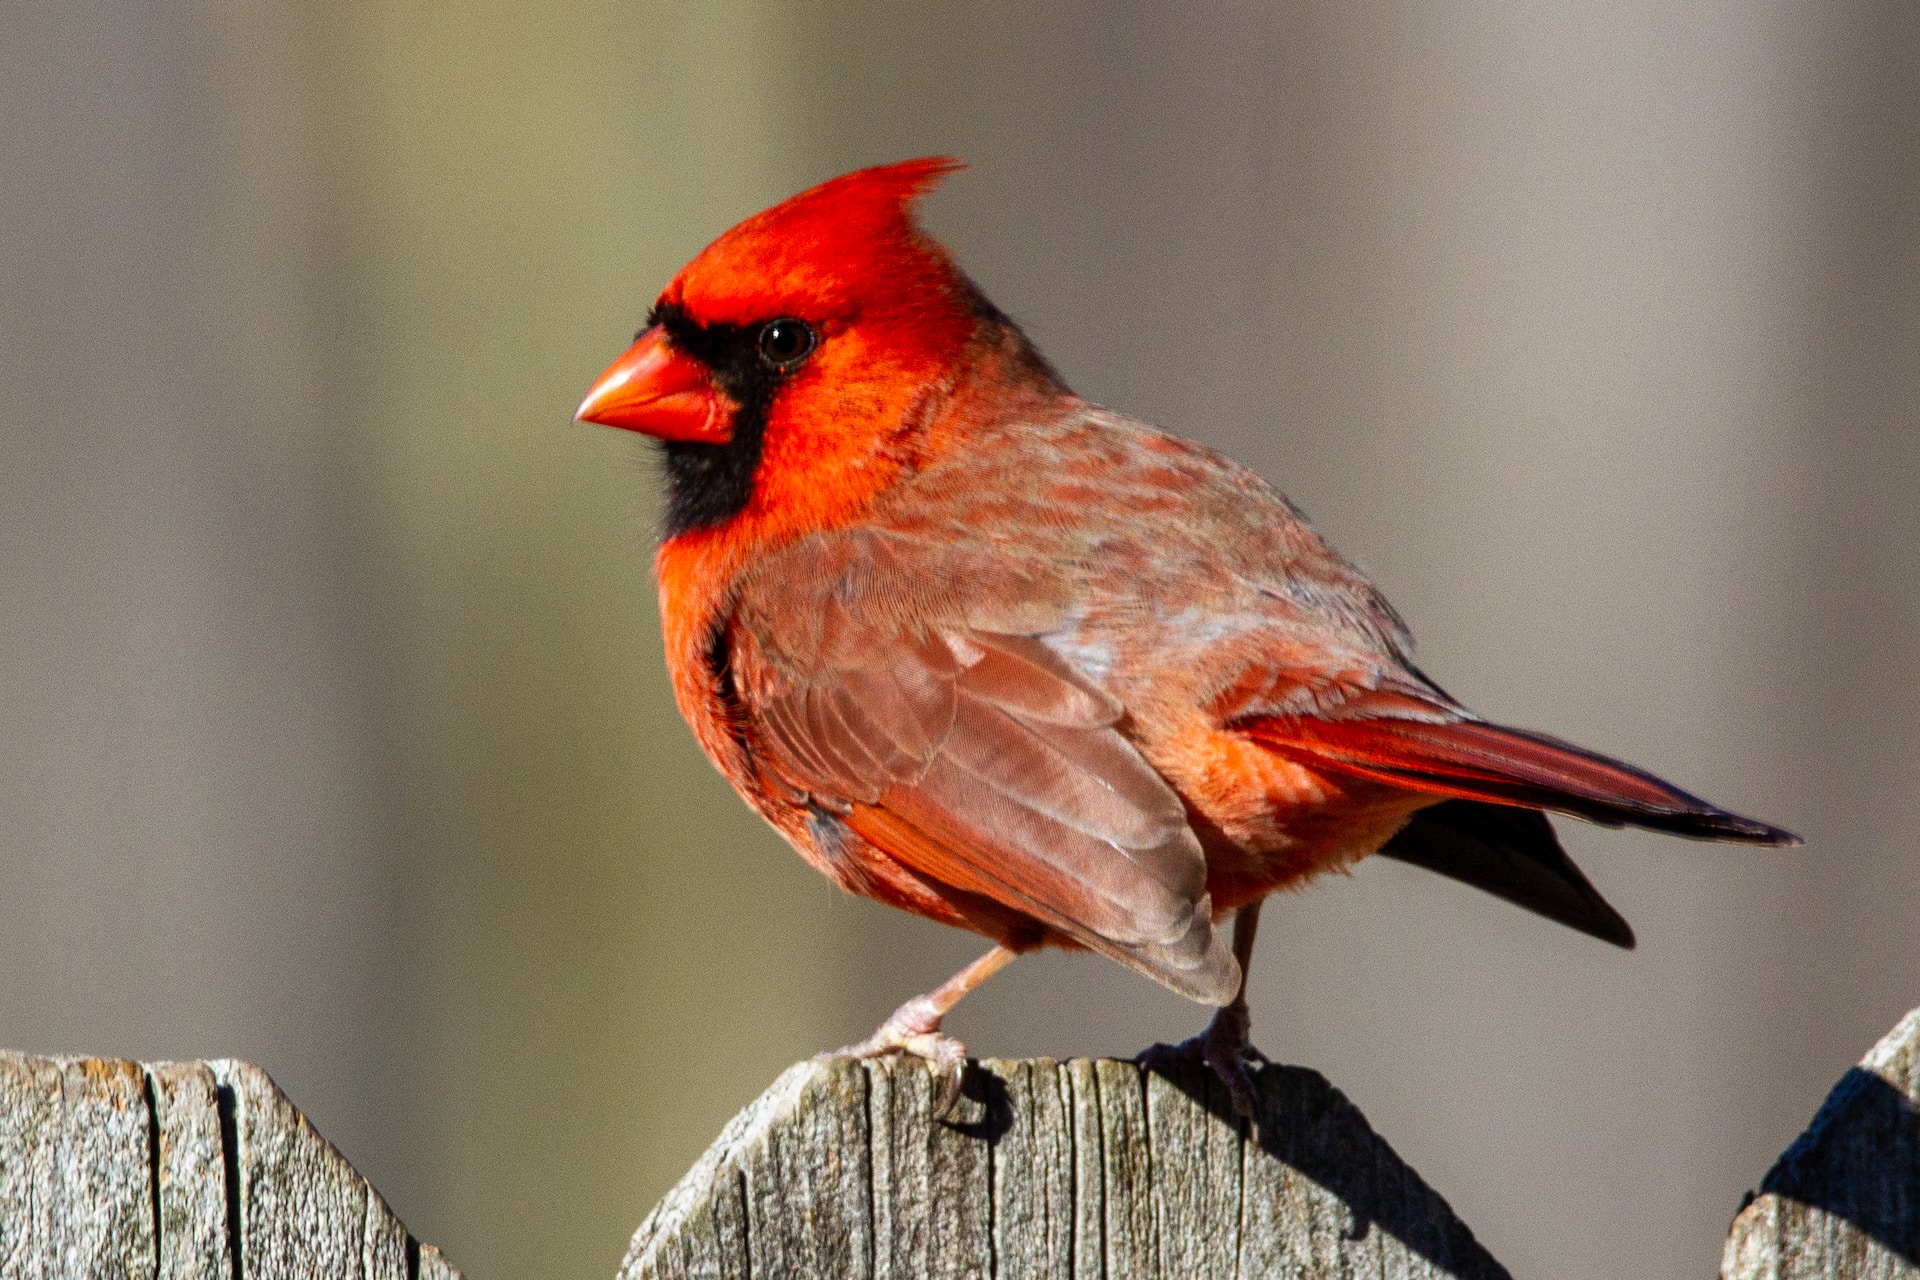 A northern cardinal sitting on a wood